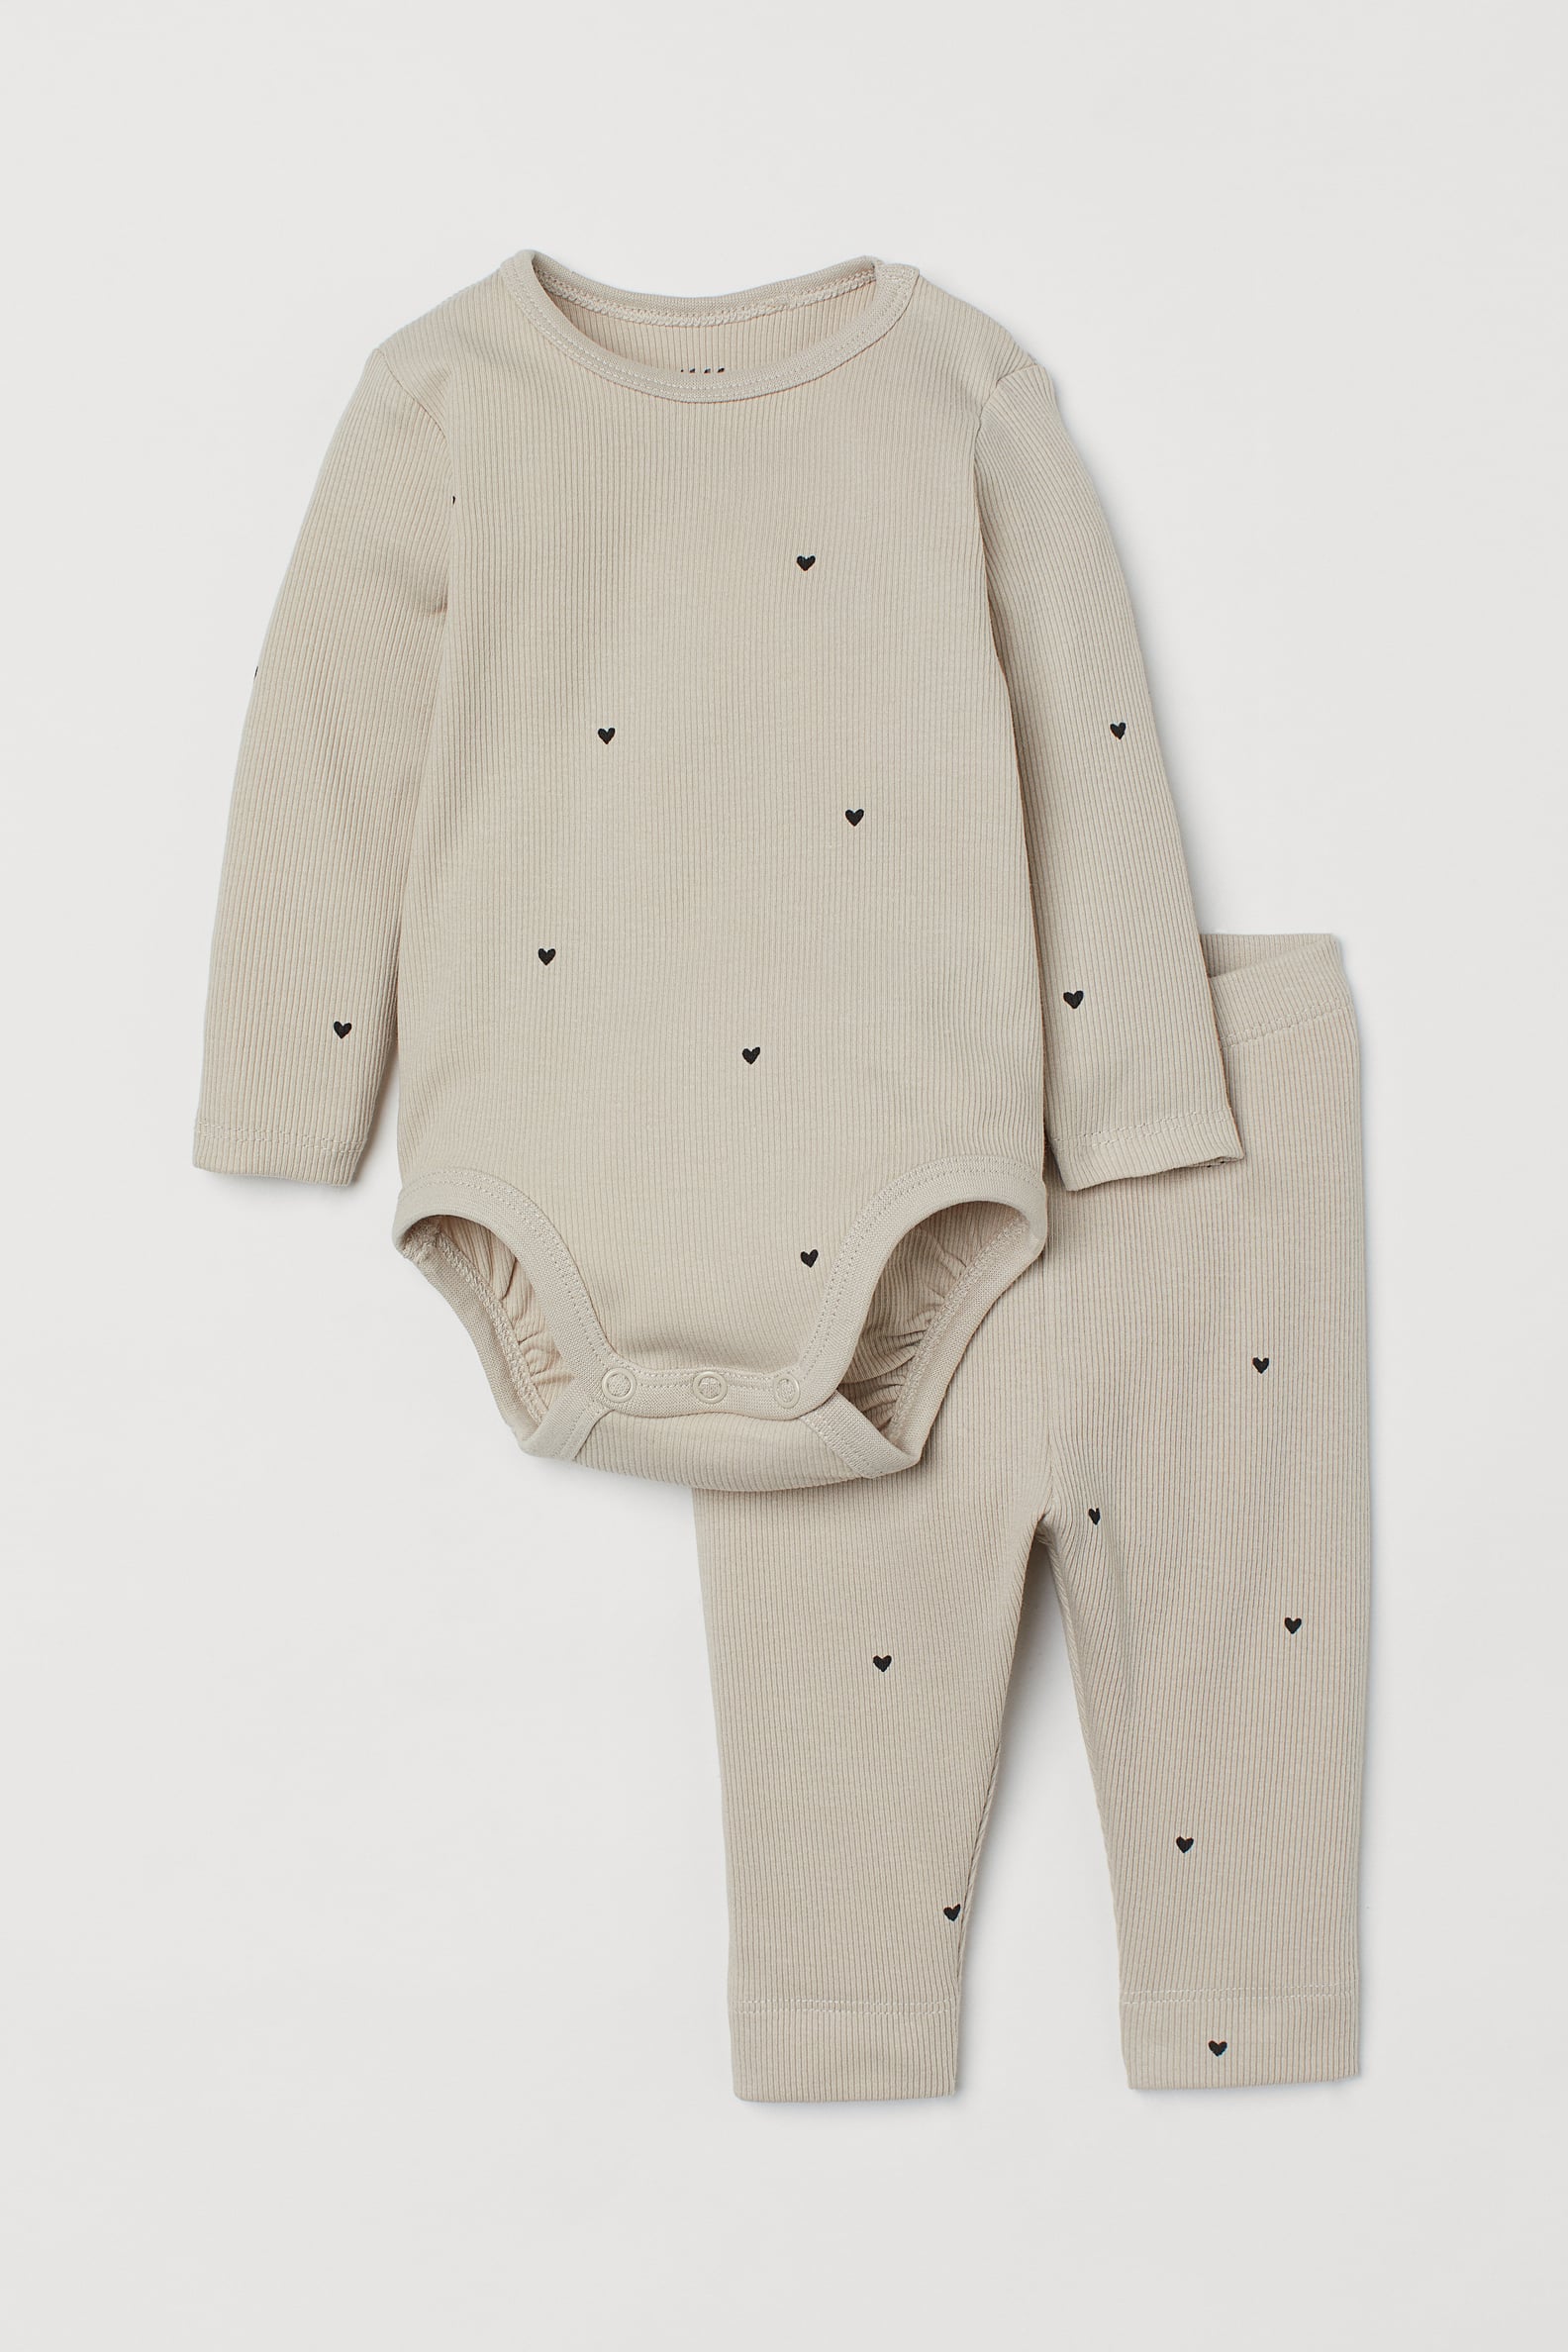 This Affordable, Quality Babywear Will Grow With Your Infant | POPSUGAR ...